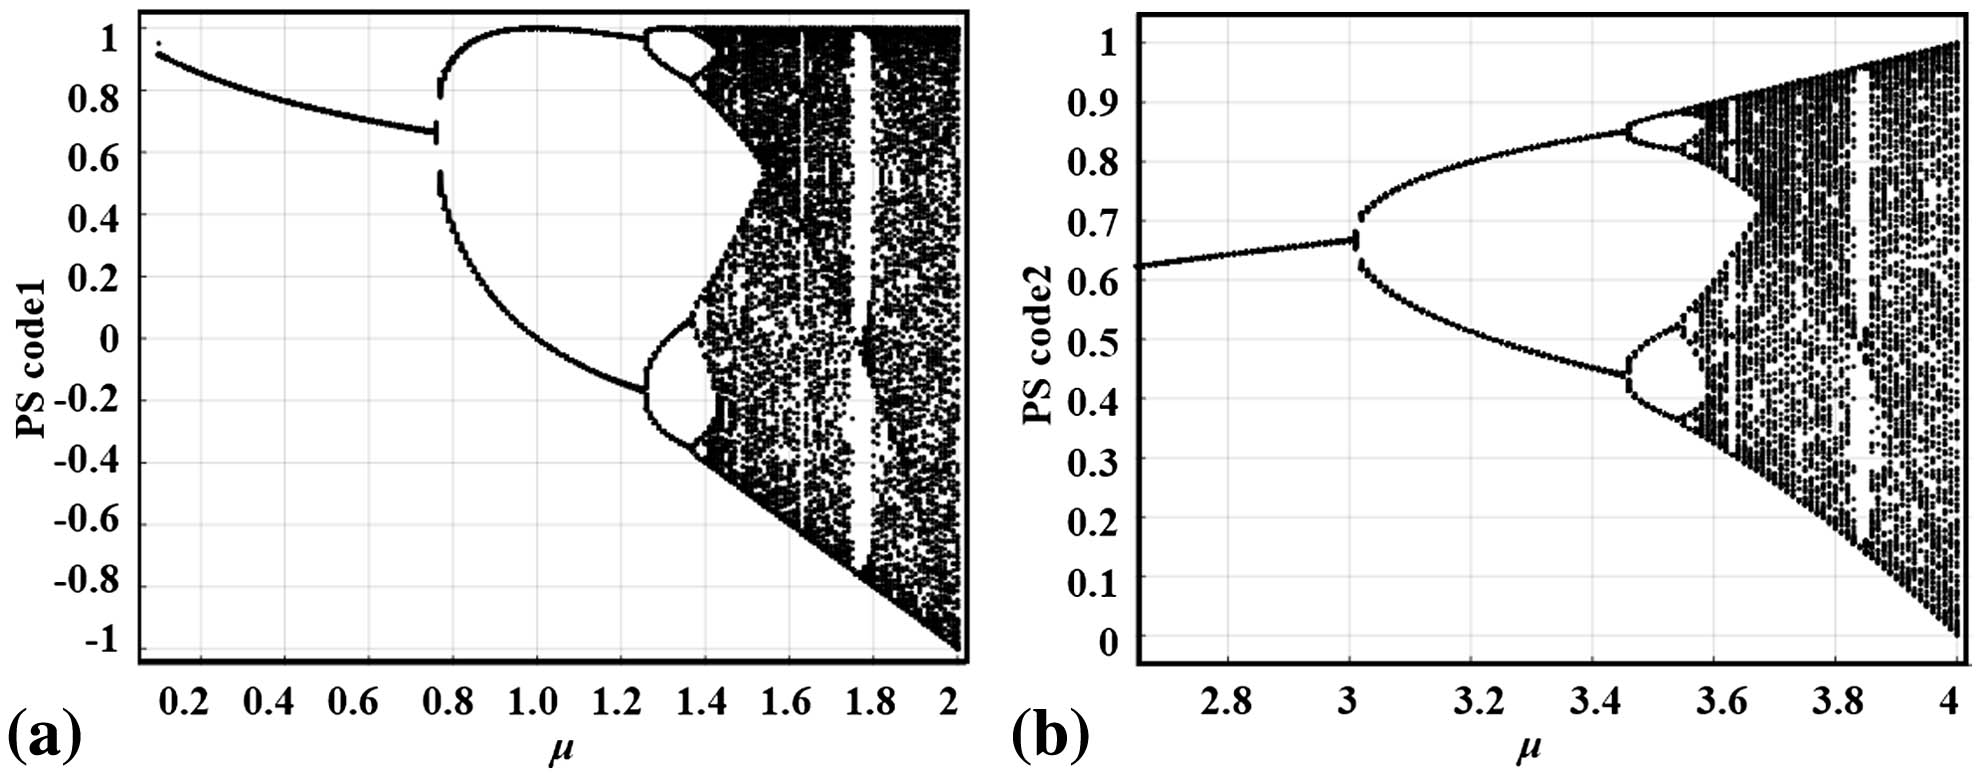 Logistic maps generated by (a) Eq. (8) and (b) Eq. (9) when the bifurcation parameter μ changes.